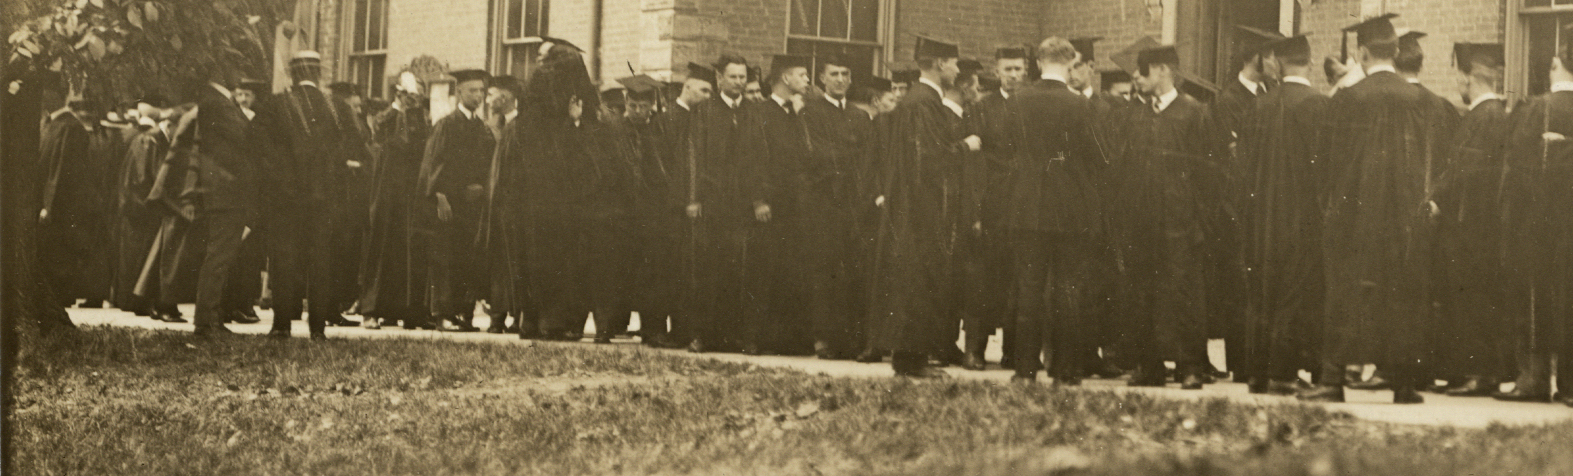 The Class of 1923 lines up for procession in front of Center Hall. That tradition continues today.